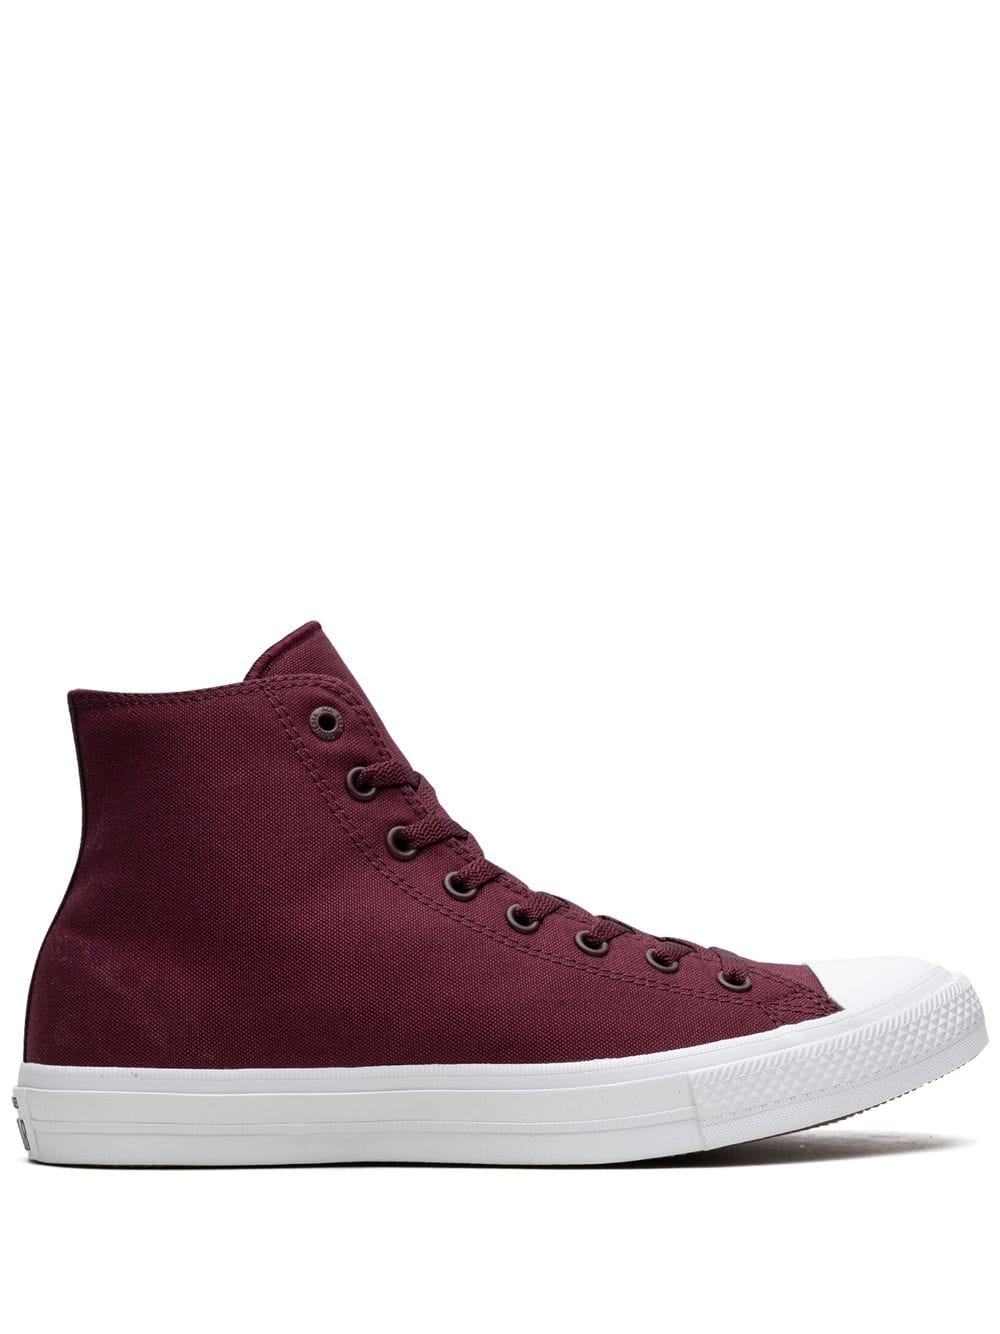 Converse Chuck Taylor All Star 2 High sneakers - Red